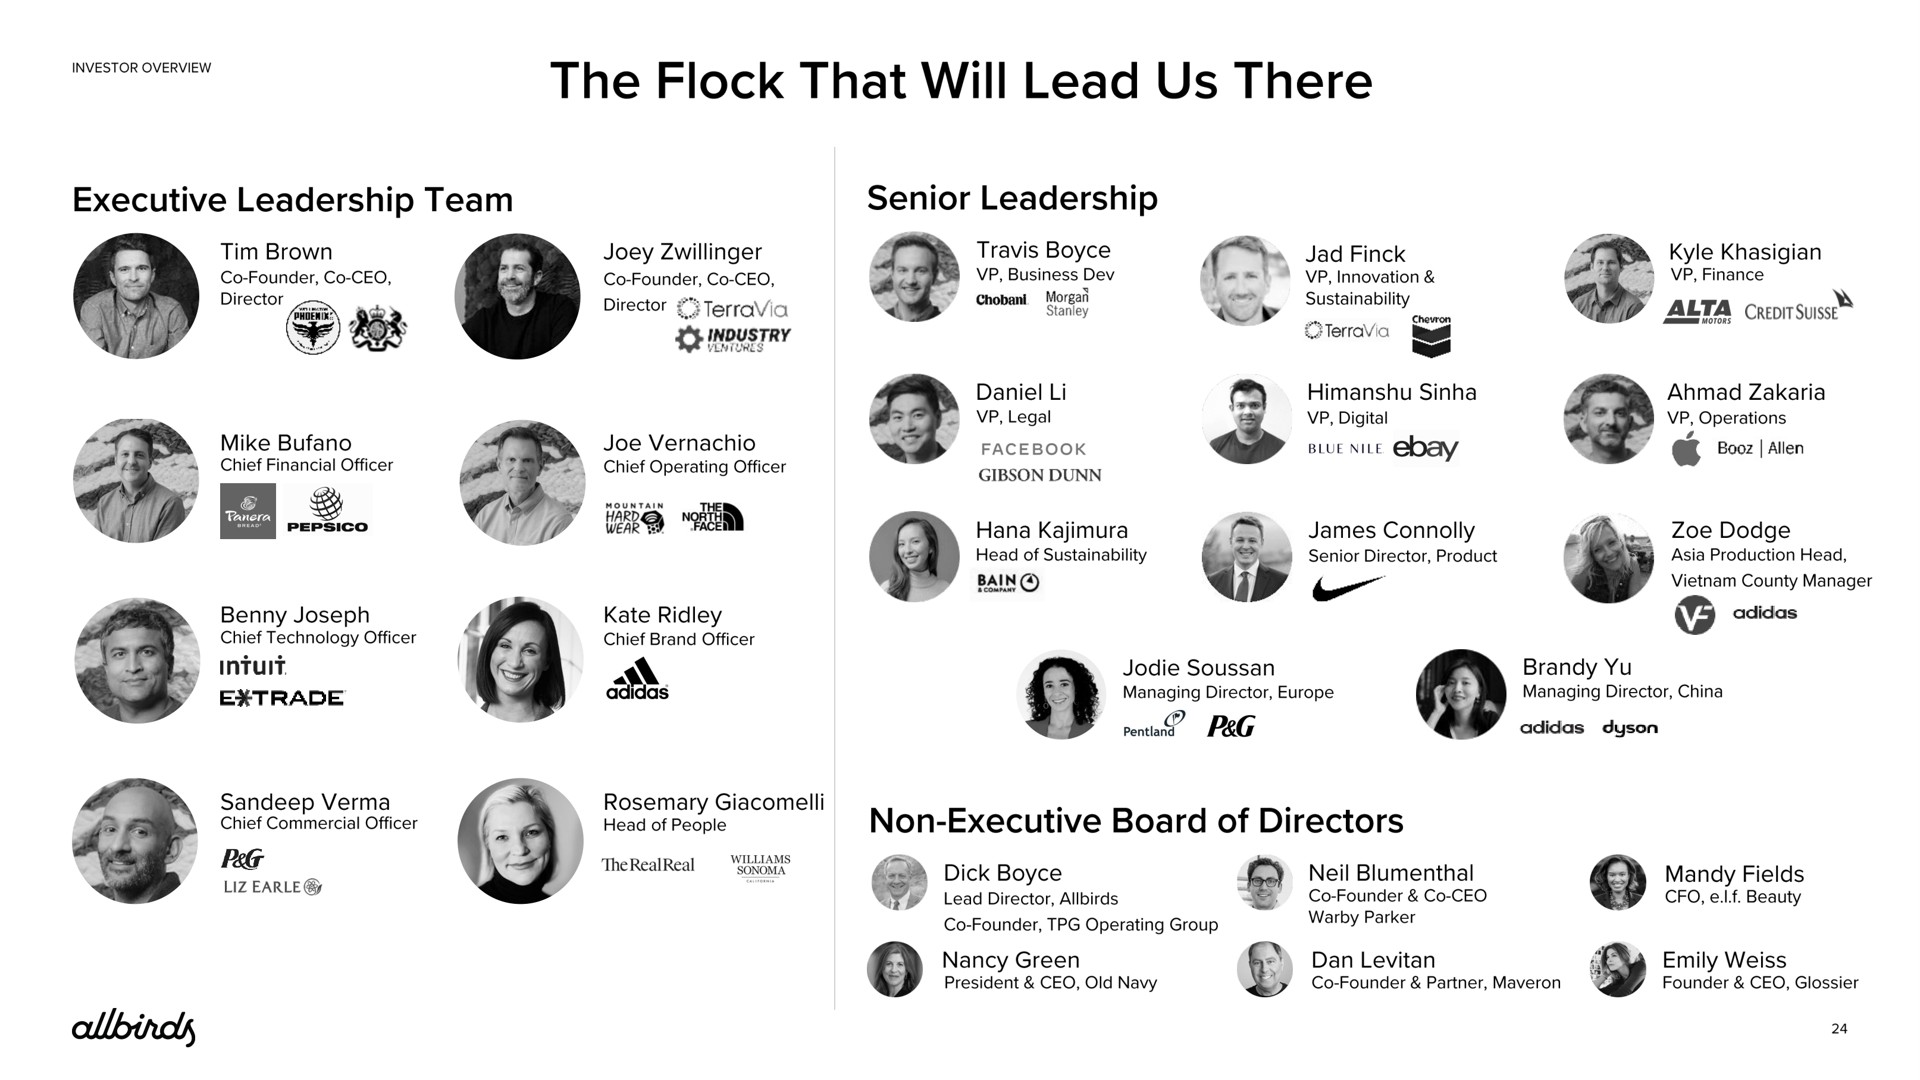 the flock that will lead us there executive leadership team senior leadership industry non executive board of directors | Allbirds